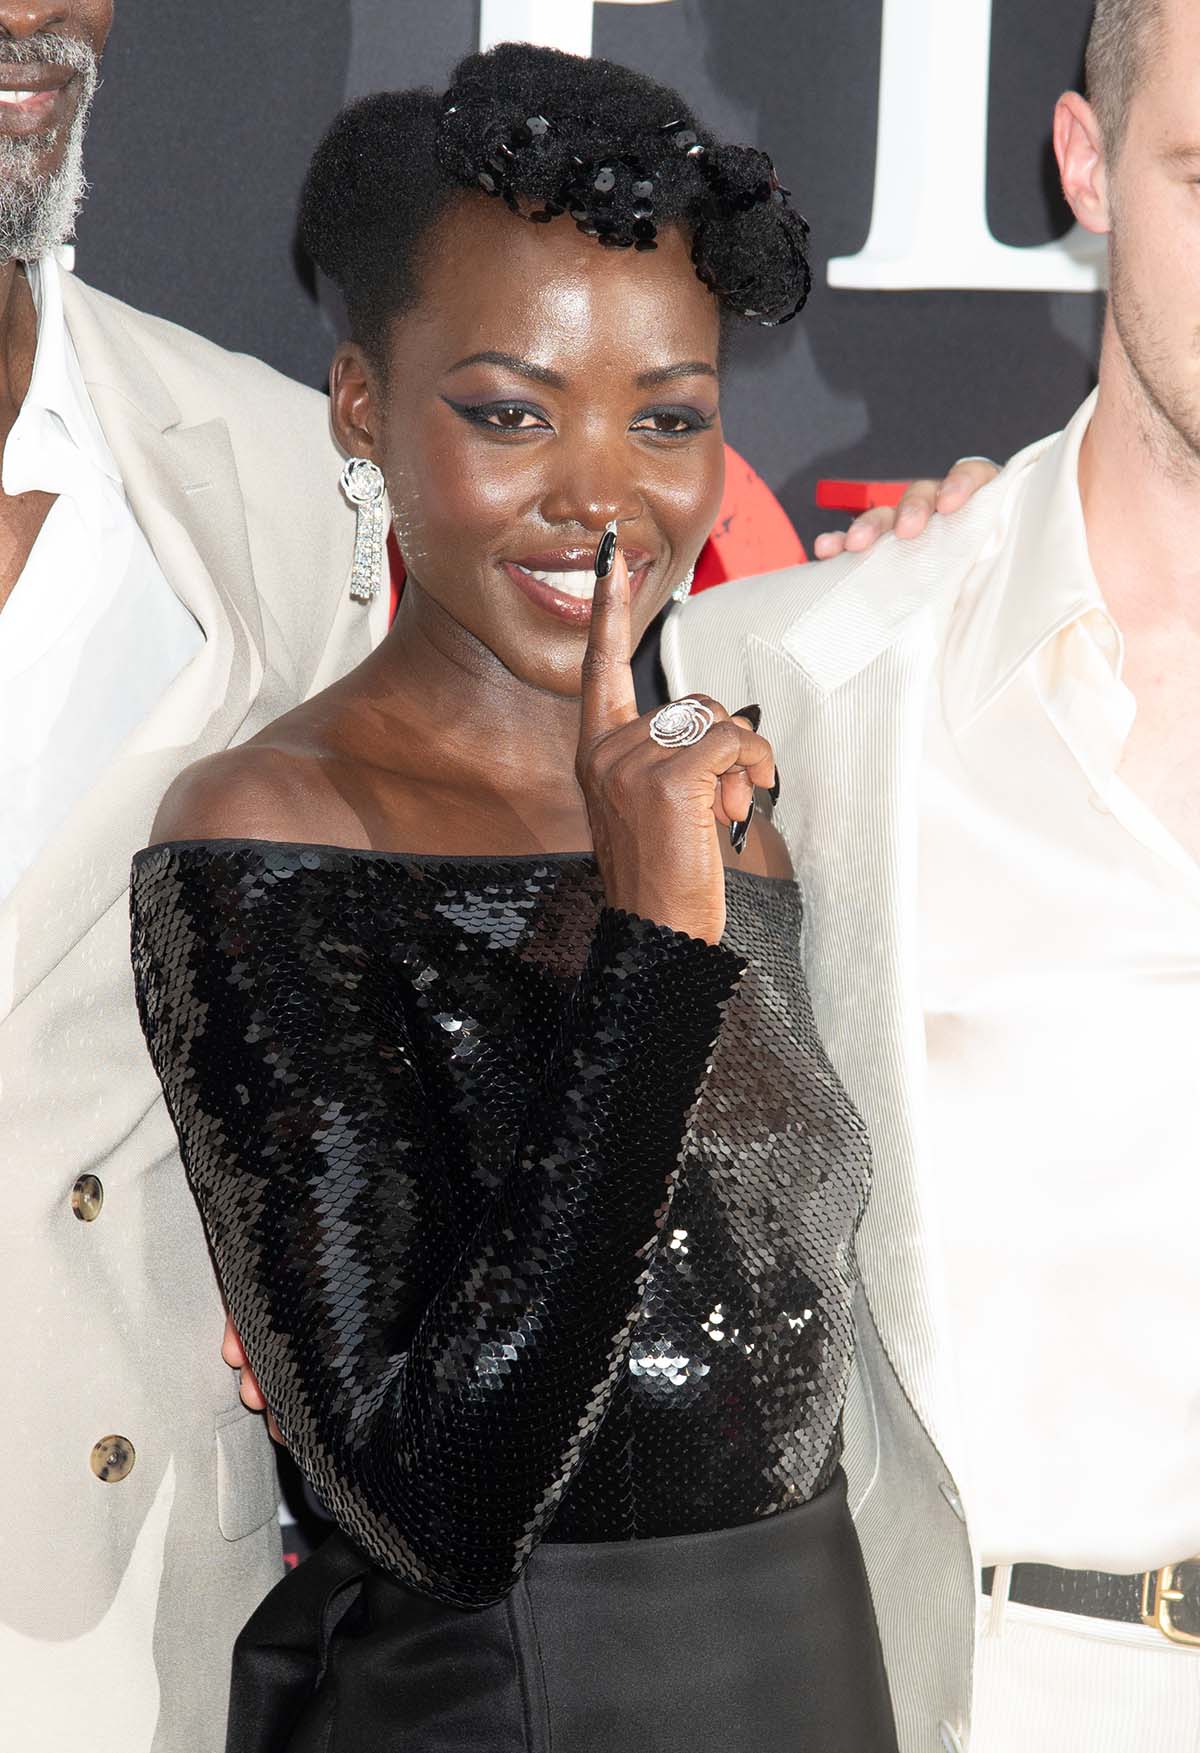 Lupita Nyong'o fashions her pixie hair with sequin-adorned afro bangs and wears cat eye makeup to enhance the ensemble's feline theme